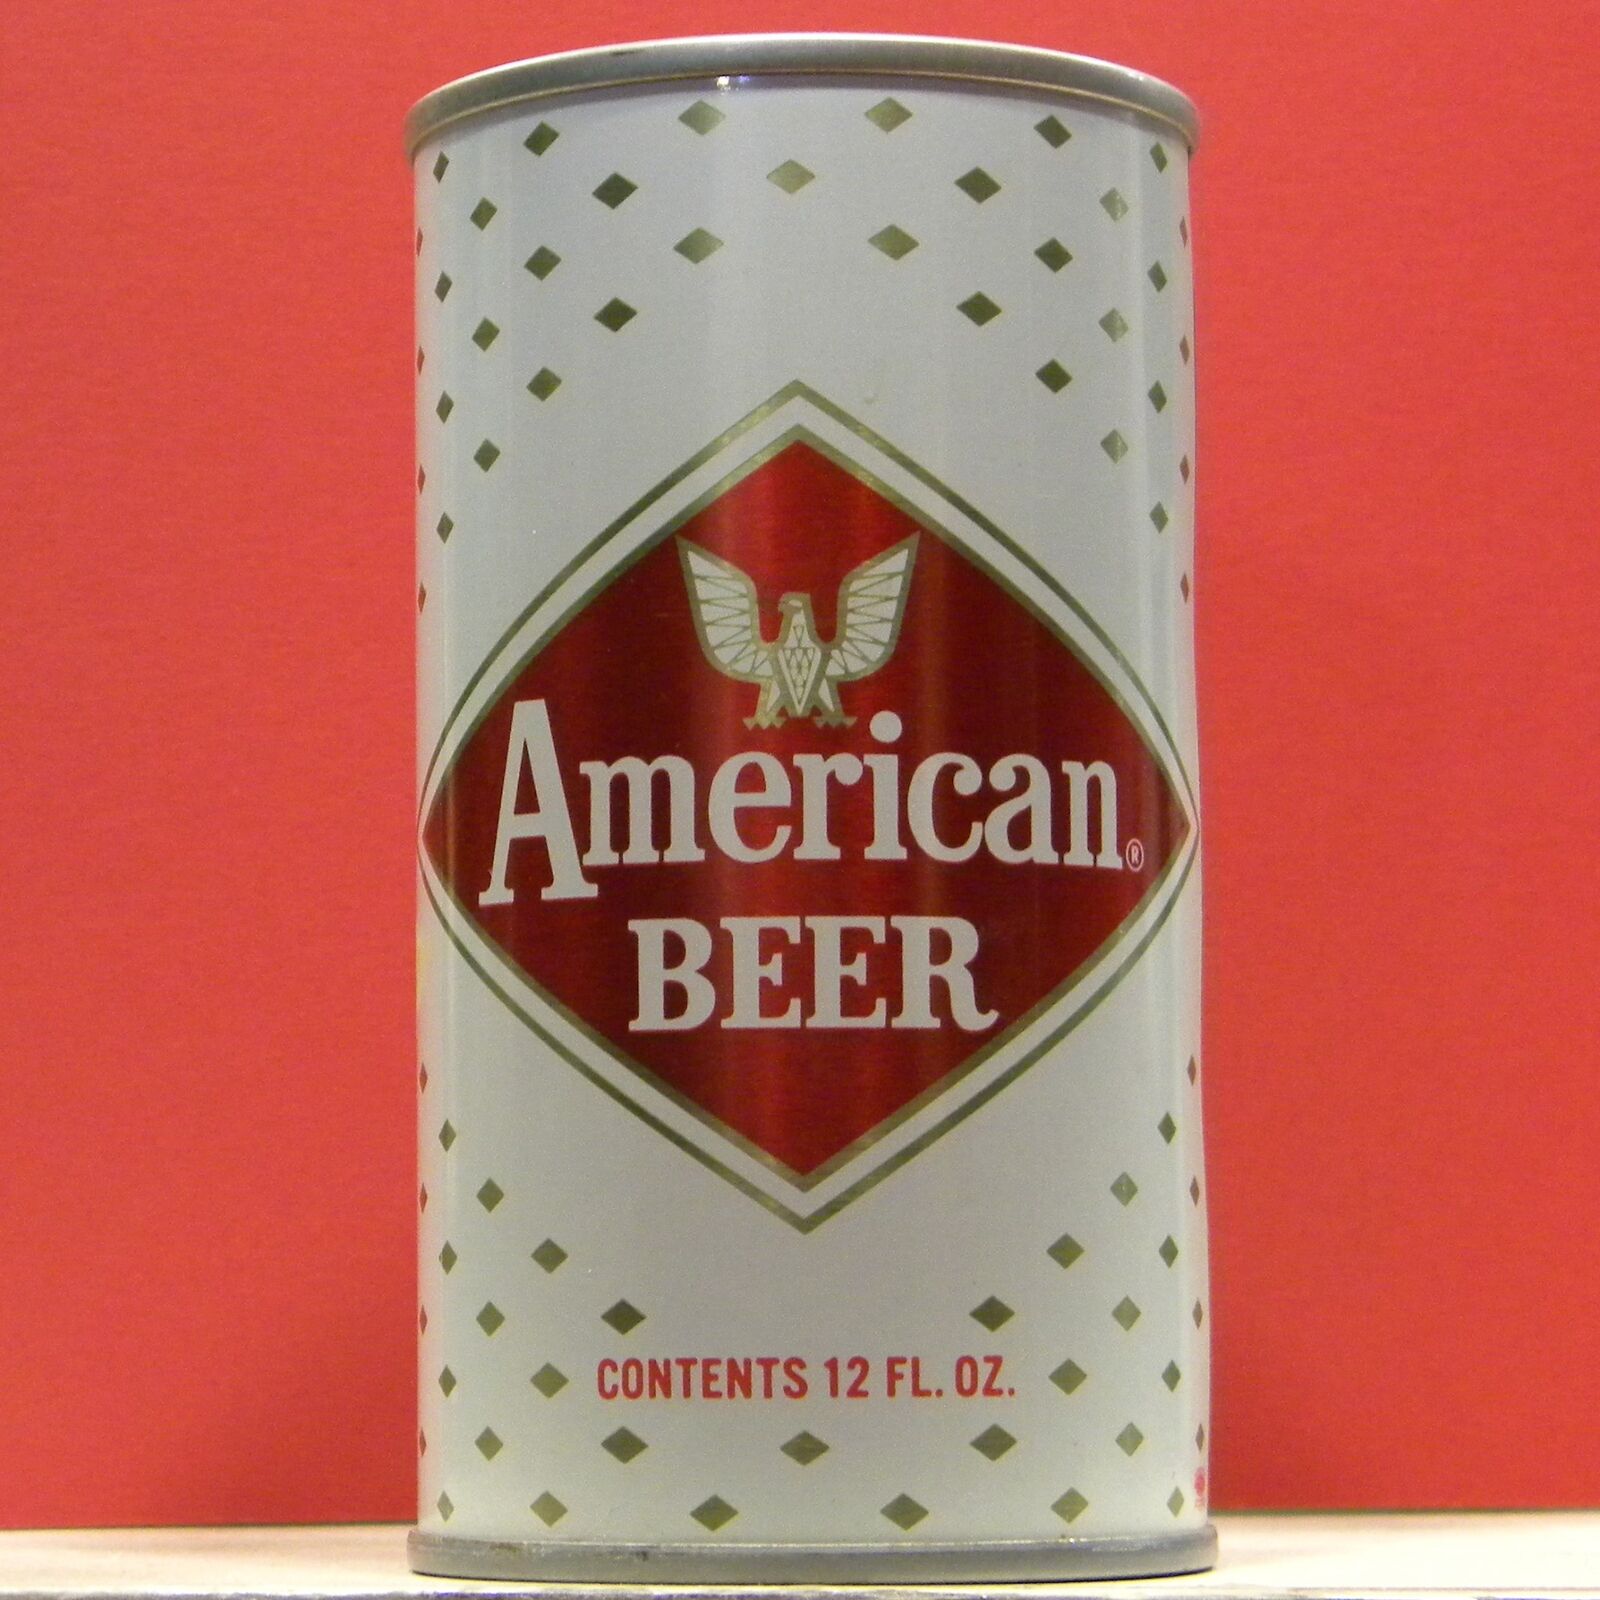 American Beer S/S 12 oz Can Picture of Eagle Pittsburgh Pennsylvania 694 H/G B/O